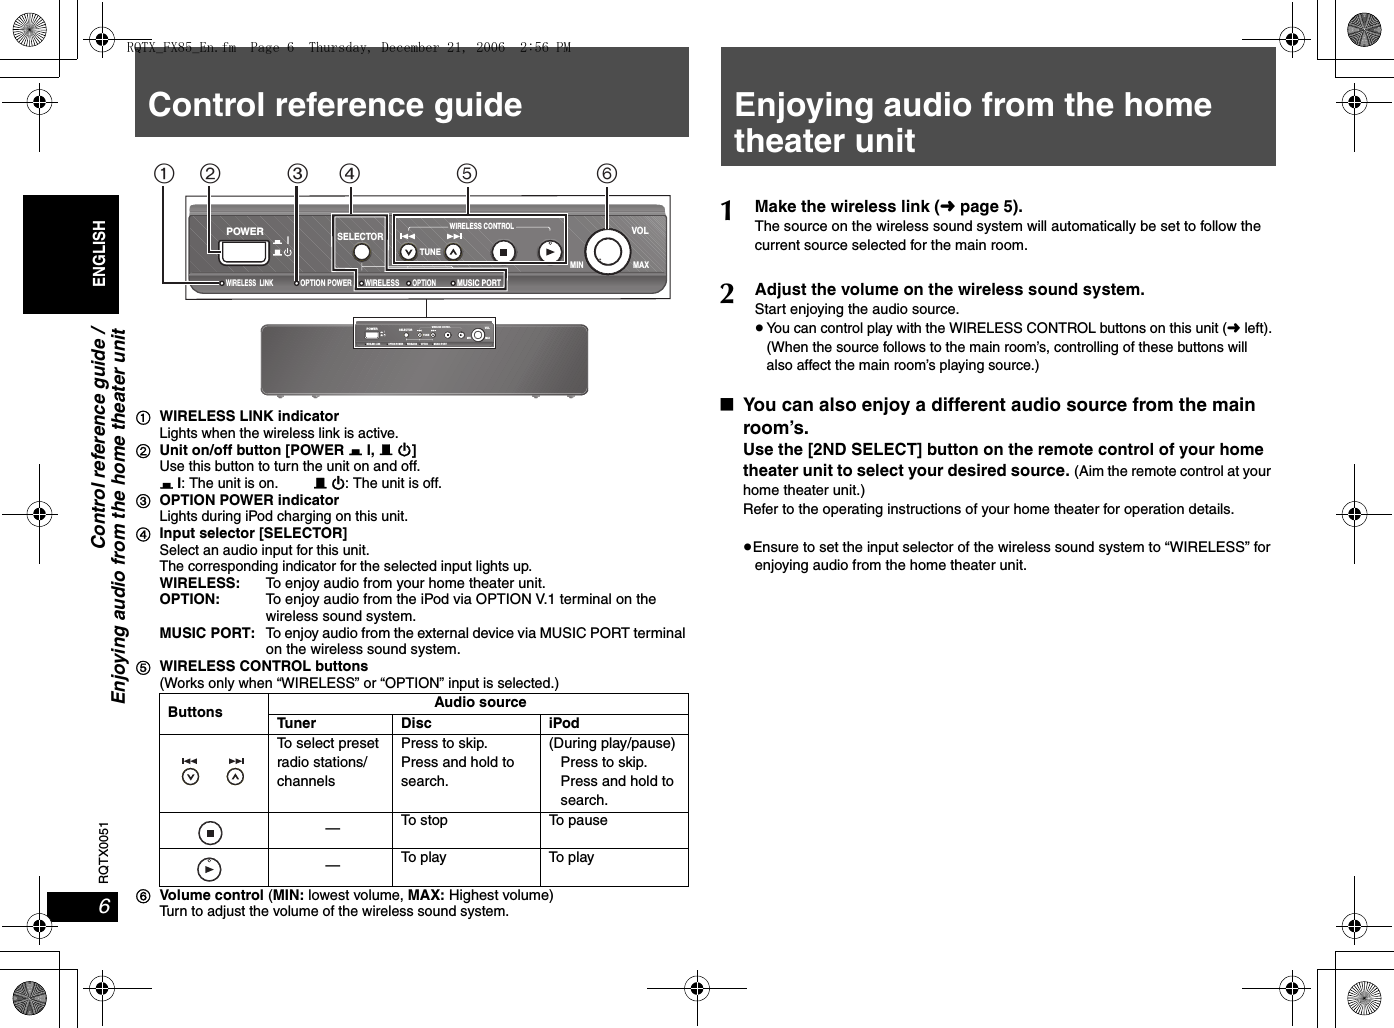 6RQTX0051ENGLISHControl reference guide /Enjoying audio from the home theater unitEnjoying audio from the home theater unit1WIRELESS LINK indicatorLights when the wireless link is active.2Unit on/off button [POWER C I, B Í]Use this button to turn the unit on and off.C I: The unit is on.B Í: The unit is off.3OPTION POWER indicatorLights during iPod charging on this unit.4Input selector [SELECTOR]Select an audio input for this unit.The corresponding indicator for the selected input lights up.WIRELESS: To enjoy audio from your home theater unit.OPTION: To enjoy audio from the iPod via OPTION V.1 terminal on the wireless sound system.MUSIC PORT: To enjoy audio from the external device via MUSIC PORT terminal on the wireless sound system.5WIRELESS CONTROL buttons(Works only when “WIRELESS” or “OPTION” input is selected.)6Volume control (MIN: lowest volume, MAX: Highest volume)Turn to adjust the volume of the wireless sound system.Buttons Audio sourceTuner Disc iPodTo select preset radio stations/channelsPress to skip.Press and hold to search.(During play/pause)Press to skip.Press and hold to search.—To stop To pause—To p l ay To  p l ayPOWERWIRELESS  LINKOPTION POWERWIRELESSOPTIONMUSIC PORTSELECTORWIRELESS CONTROLVOLTUNEMIN MAXPOWERWIRELESS  LINKOPTION POWERWIRELESSOPTIONMUSIC PORTSELECTORWIRELESS CONTROLVOLTUNEMIN MAX    TUNE∫You can also enjoy a different audio source from the main room’s.Use the [2ND SELECT] button on the remote control of your home theater unit to select your desired source. (Aim the remote control at your home theater unit.)Refer to the operating instructions of your home theater for operation details.≥Ensure to set the input selector of the wireless sound system to “WIRELESS” for enjoying audio from the home theater unit.1Make the wireless link (➜page 5).The source on the wireless sound system will automatically be set to follow the current source selected for the main room.2Adjust the volume on the wireless sound system.Start enjoying the audio source.≥You can control play with the WIRELESS CONTROL buttons on this unit (➜left).(When the source follows to the main room’s, controlling of these buttons will also affect the main room’s playing source.)Control reference guideRQTX_FX85_En.fm  Page 6  Thursday, December 21, 2006  2:56 PM